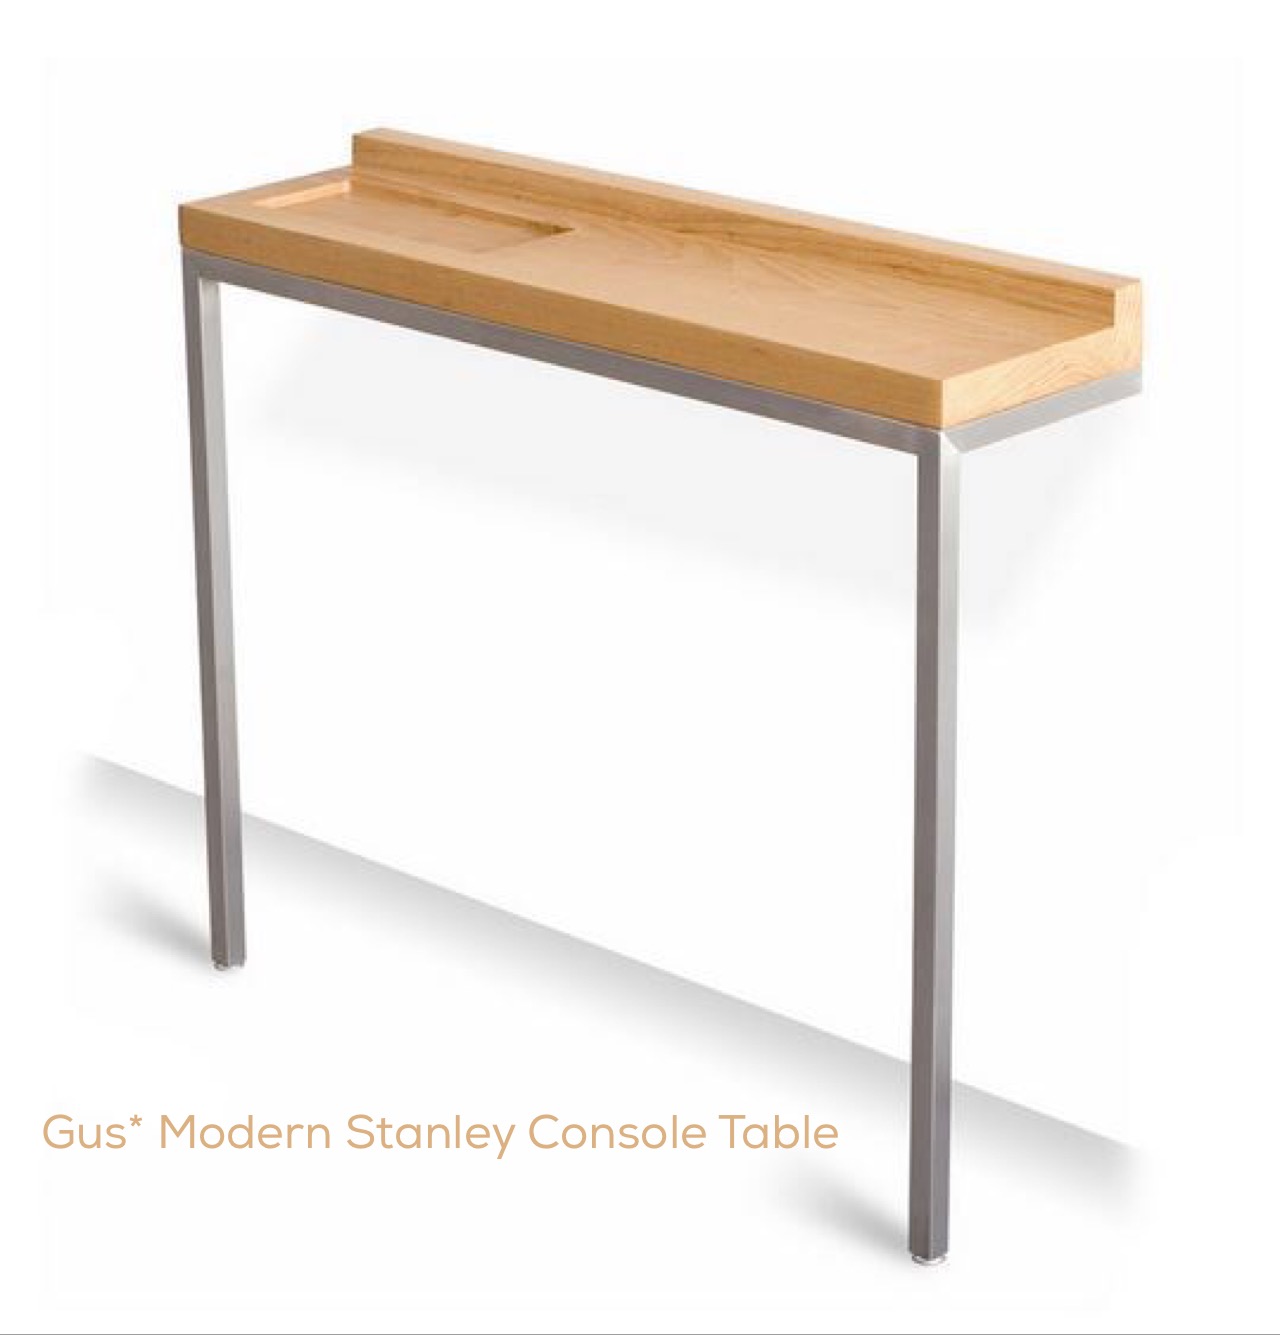 Gus Modern Stanley Console Table